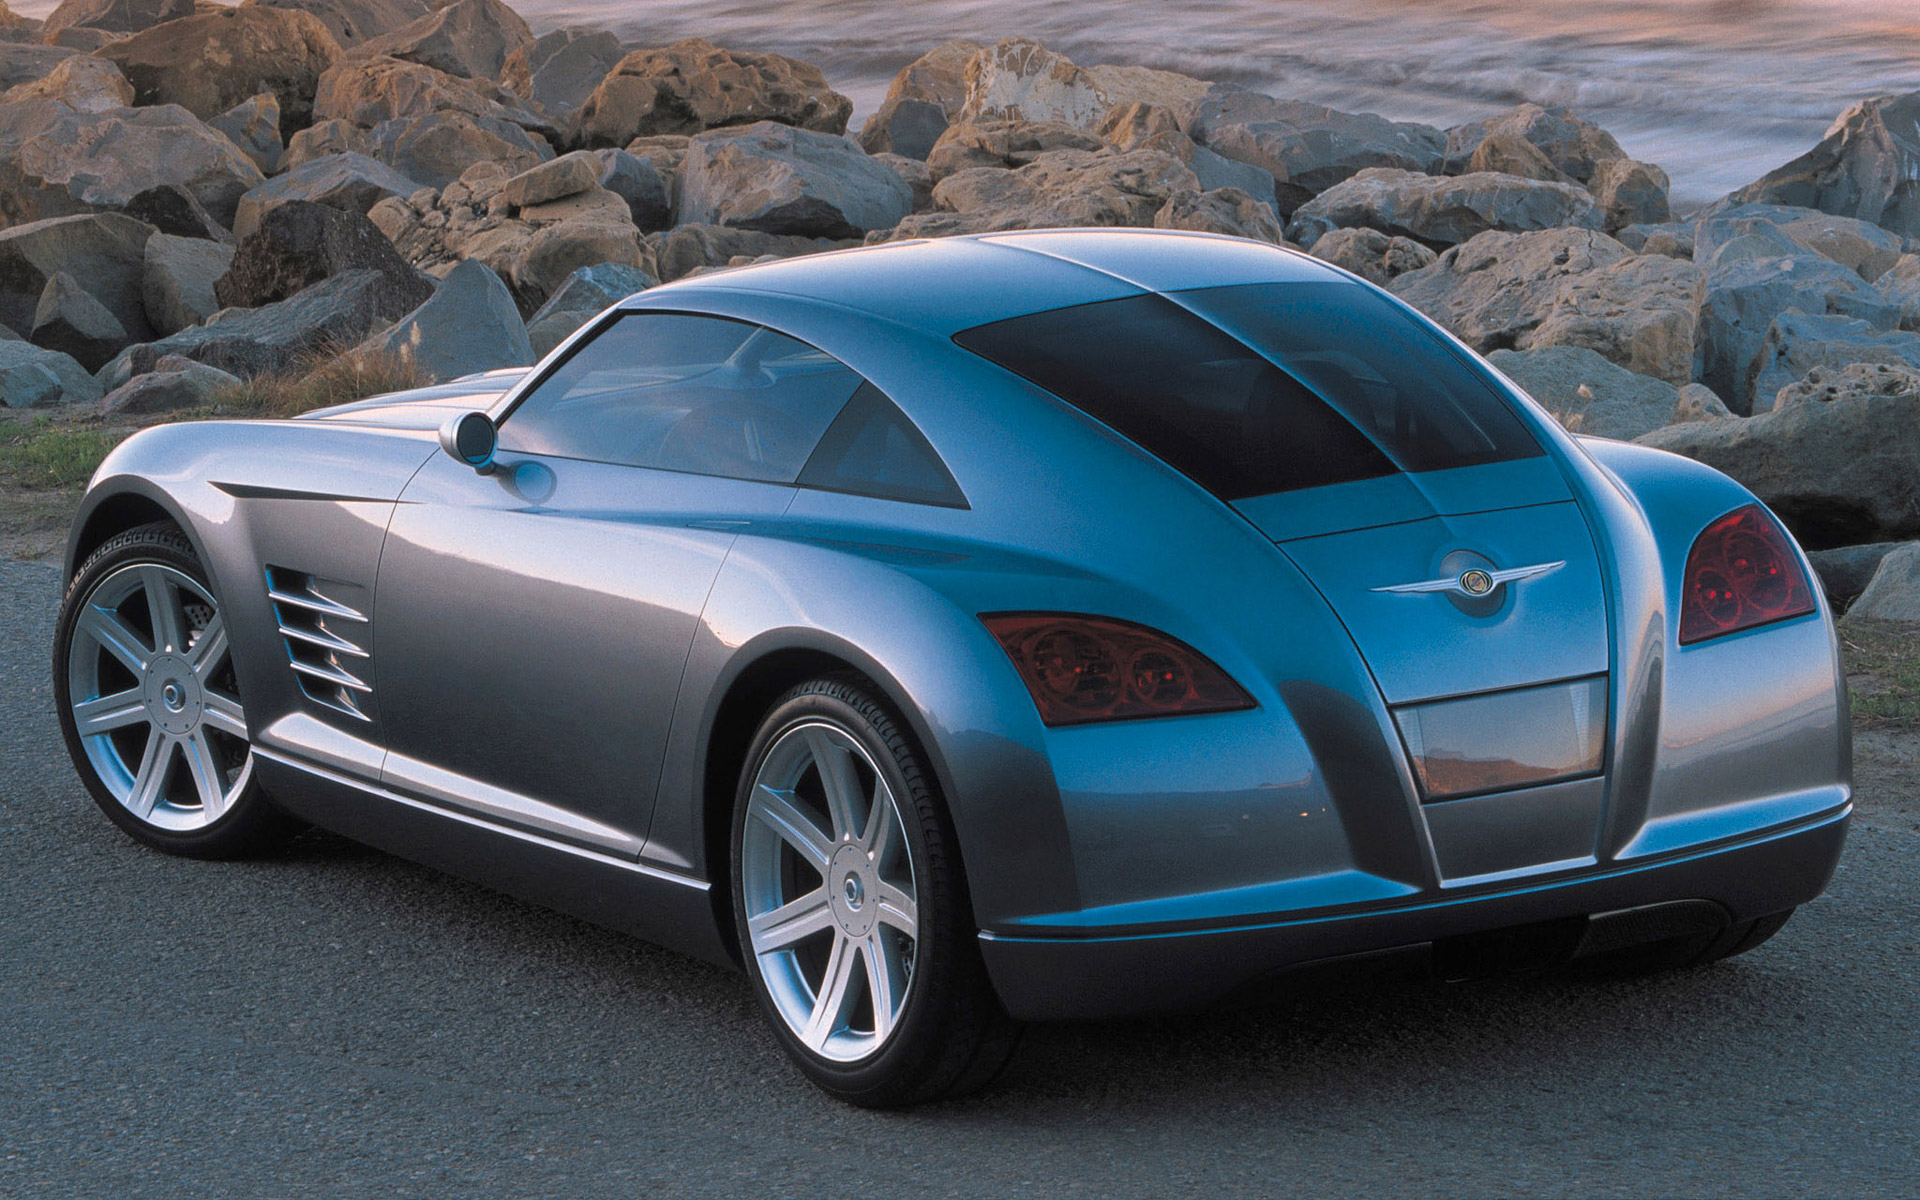 Vehicles Chrysler Crossfire HD Wallpaper | Background Image